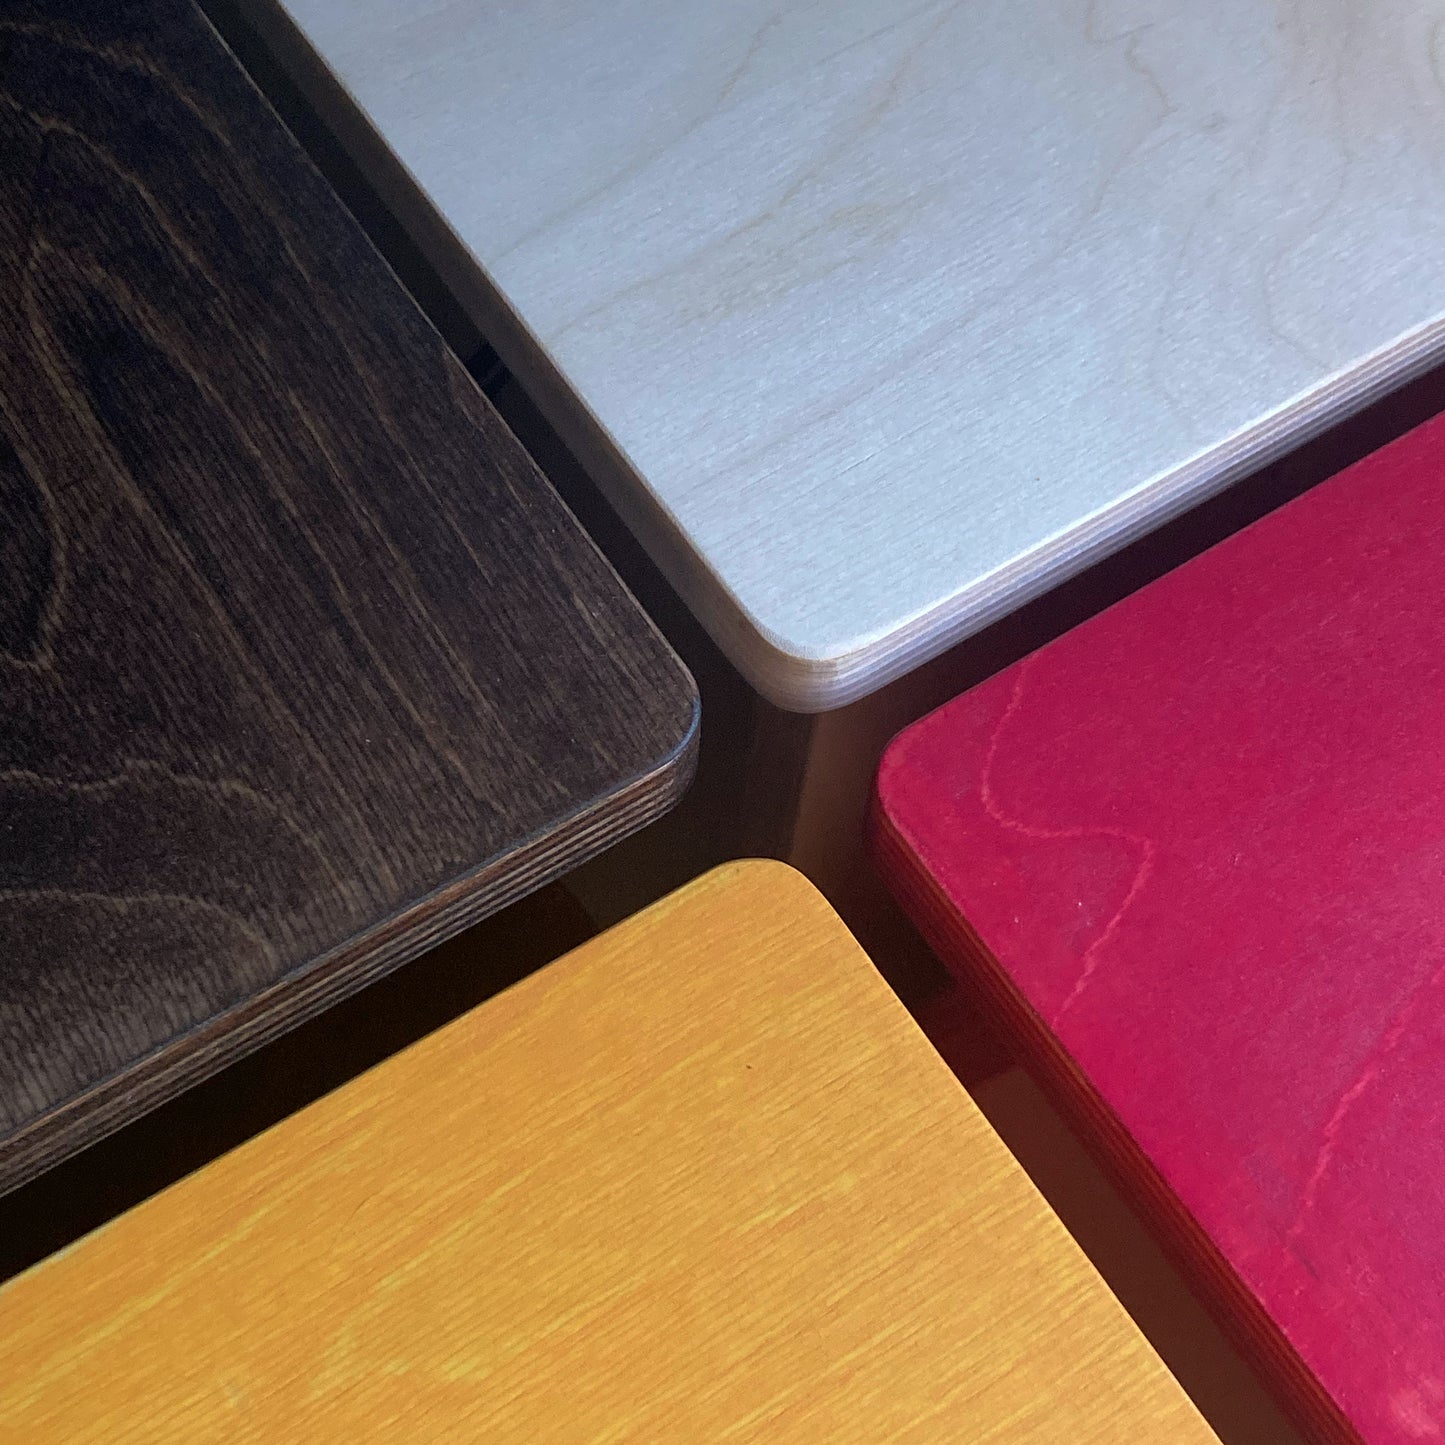 Plywood Finish Sample Wax Oil Set - choose colors and get physical set of 8 tiles before you order - sampler for furniture